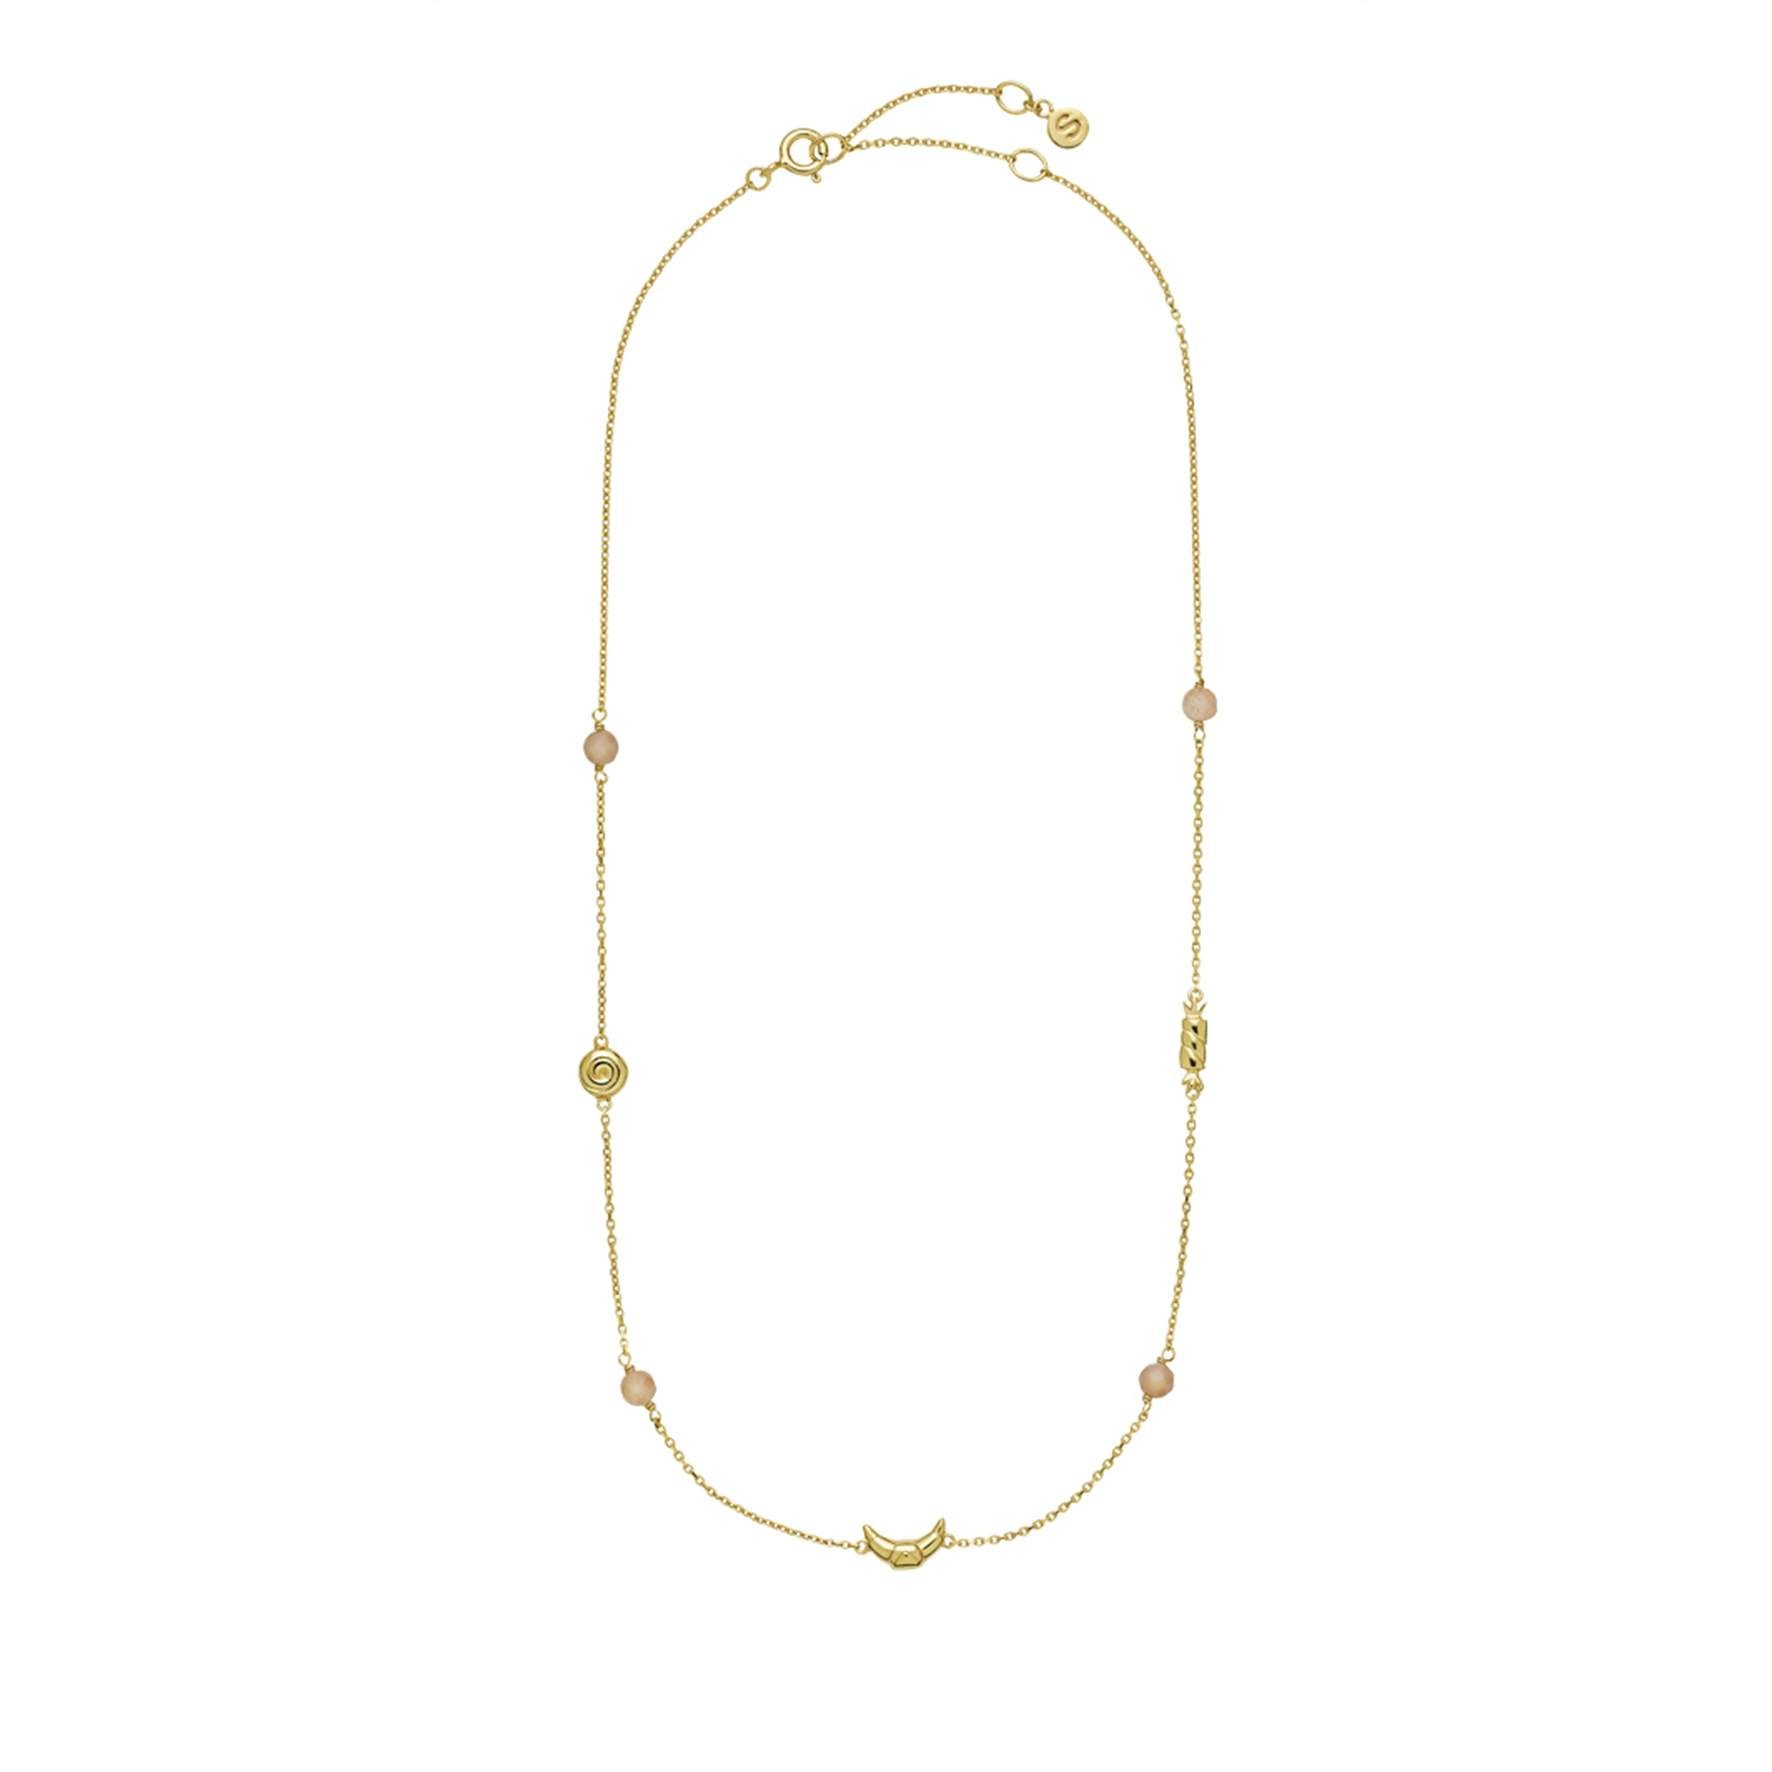 Frederikke Wærens by Sistie Croissant Necklace from Sistie in Goldplated-Silver Sterling 925